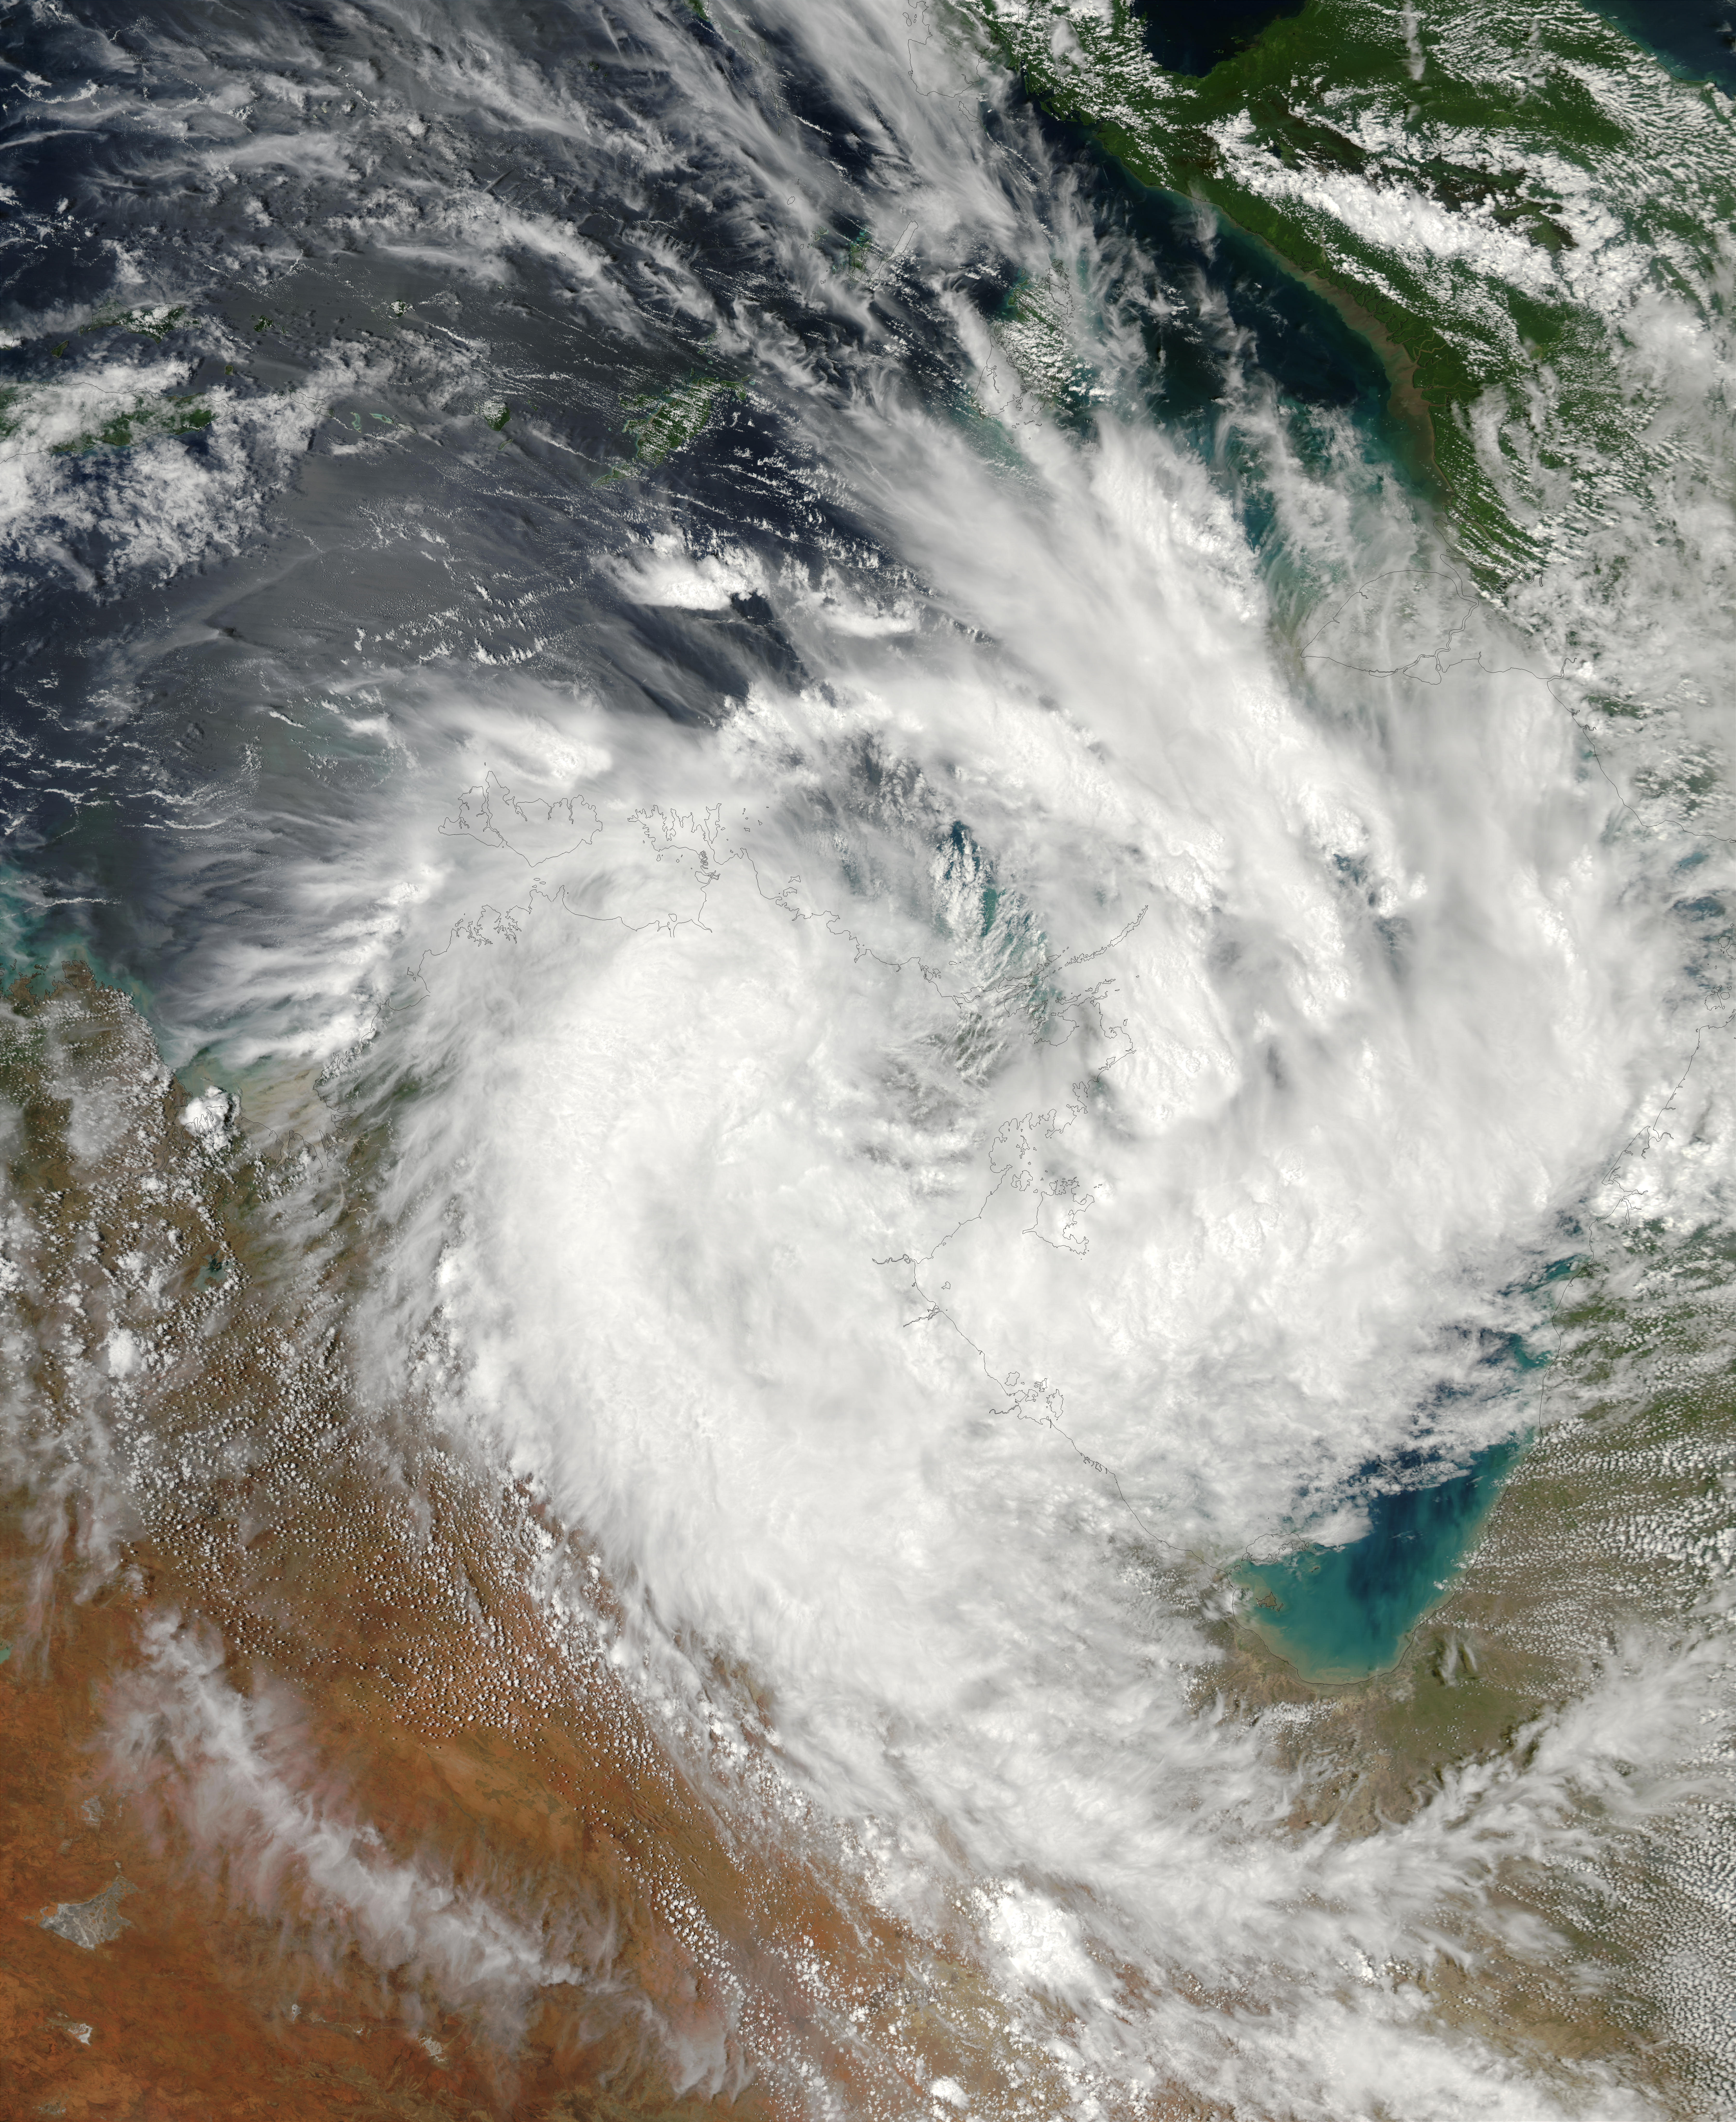 Low-Pressure Storm System over Australia - related image preview